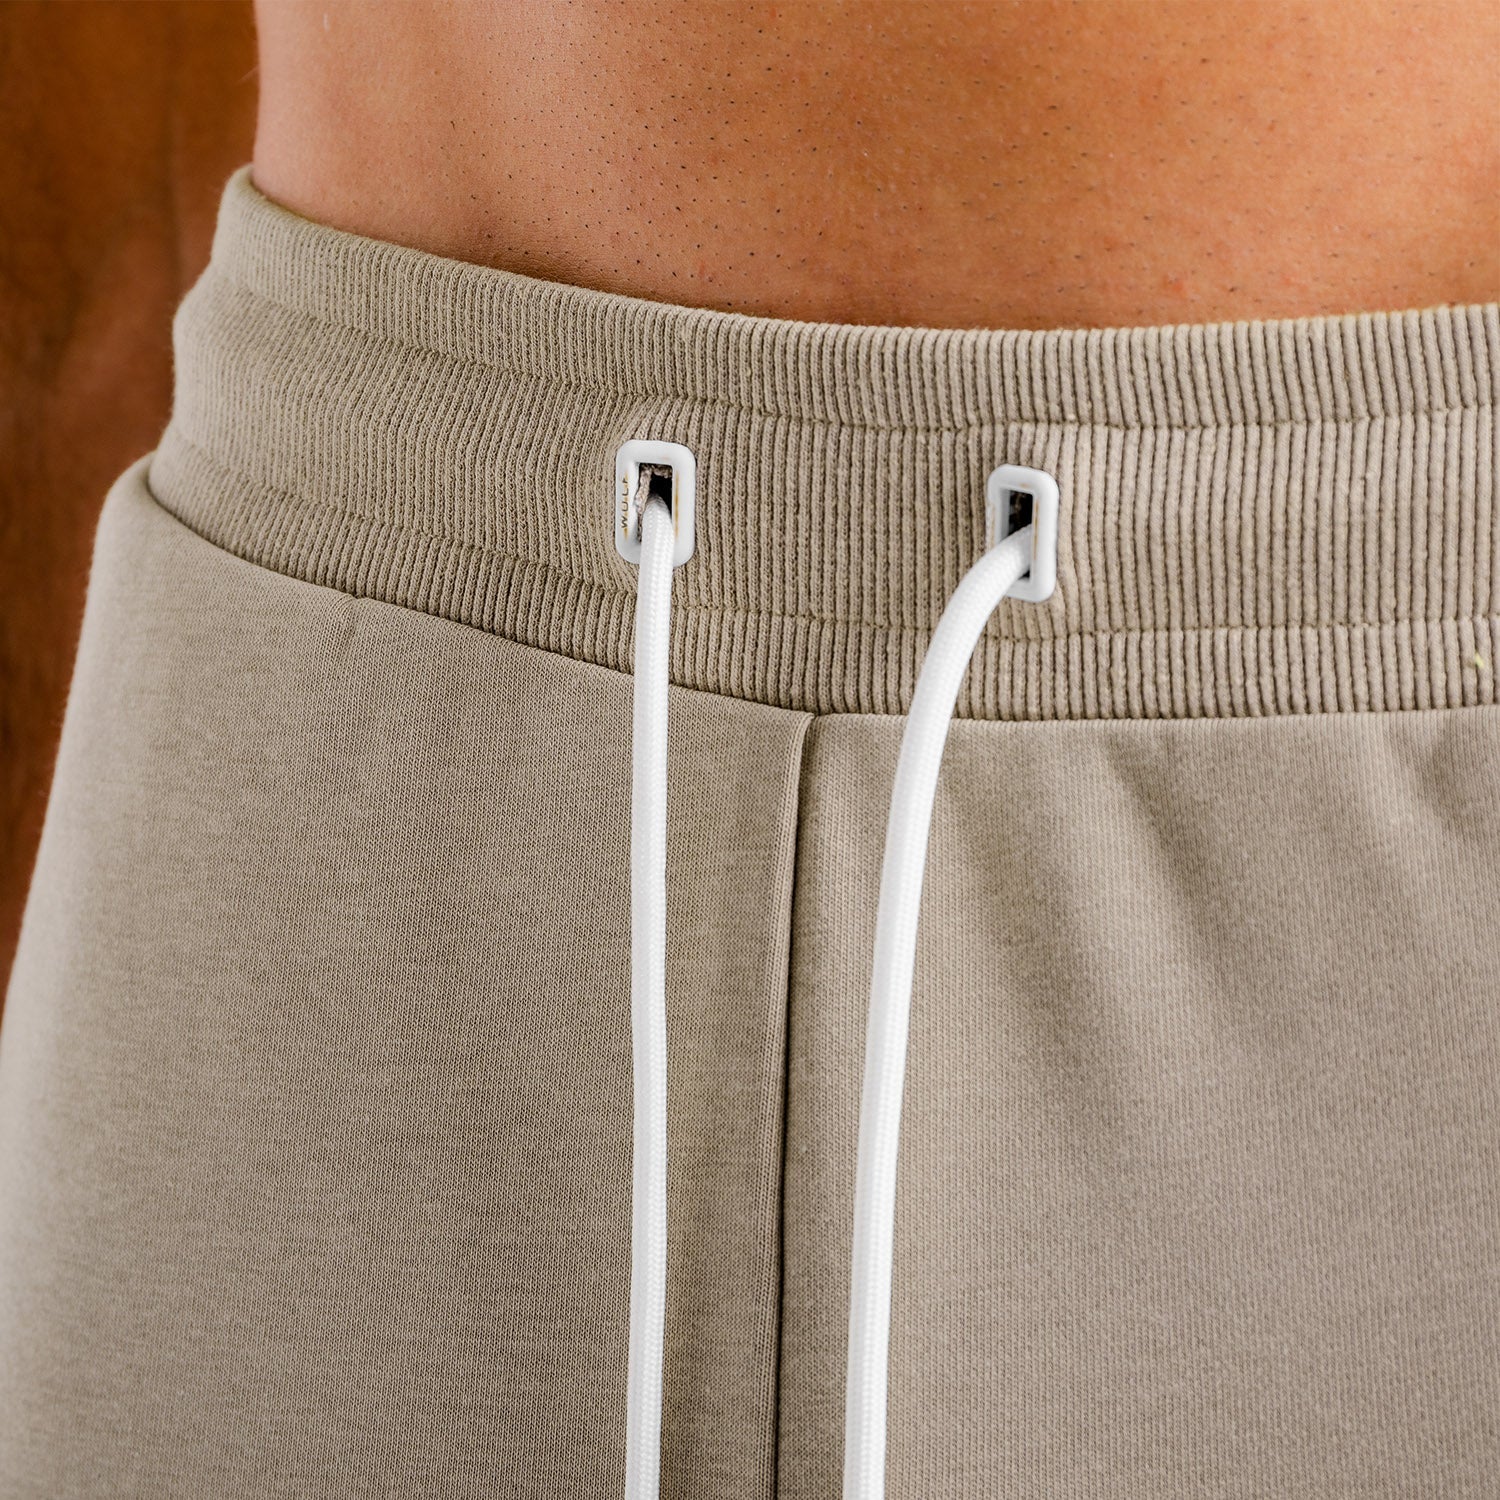 GB, Core Cuffed Joggers - Taupe, Gym Jogger Men